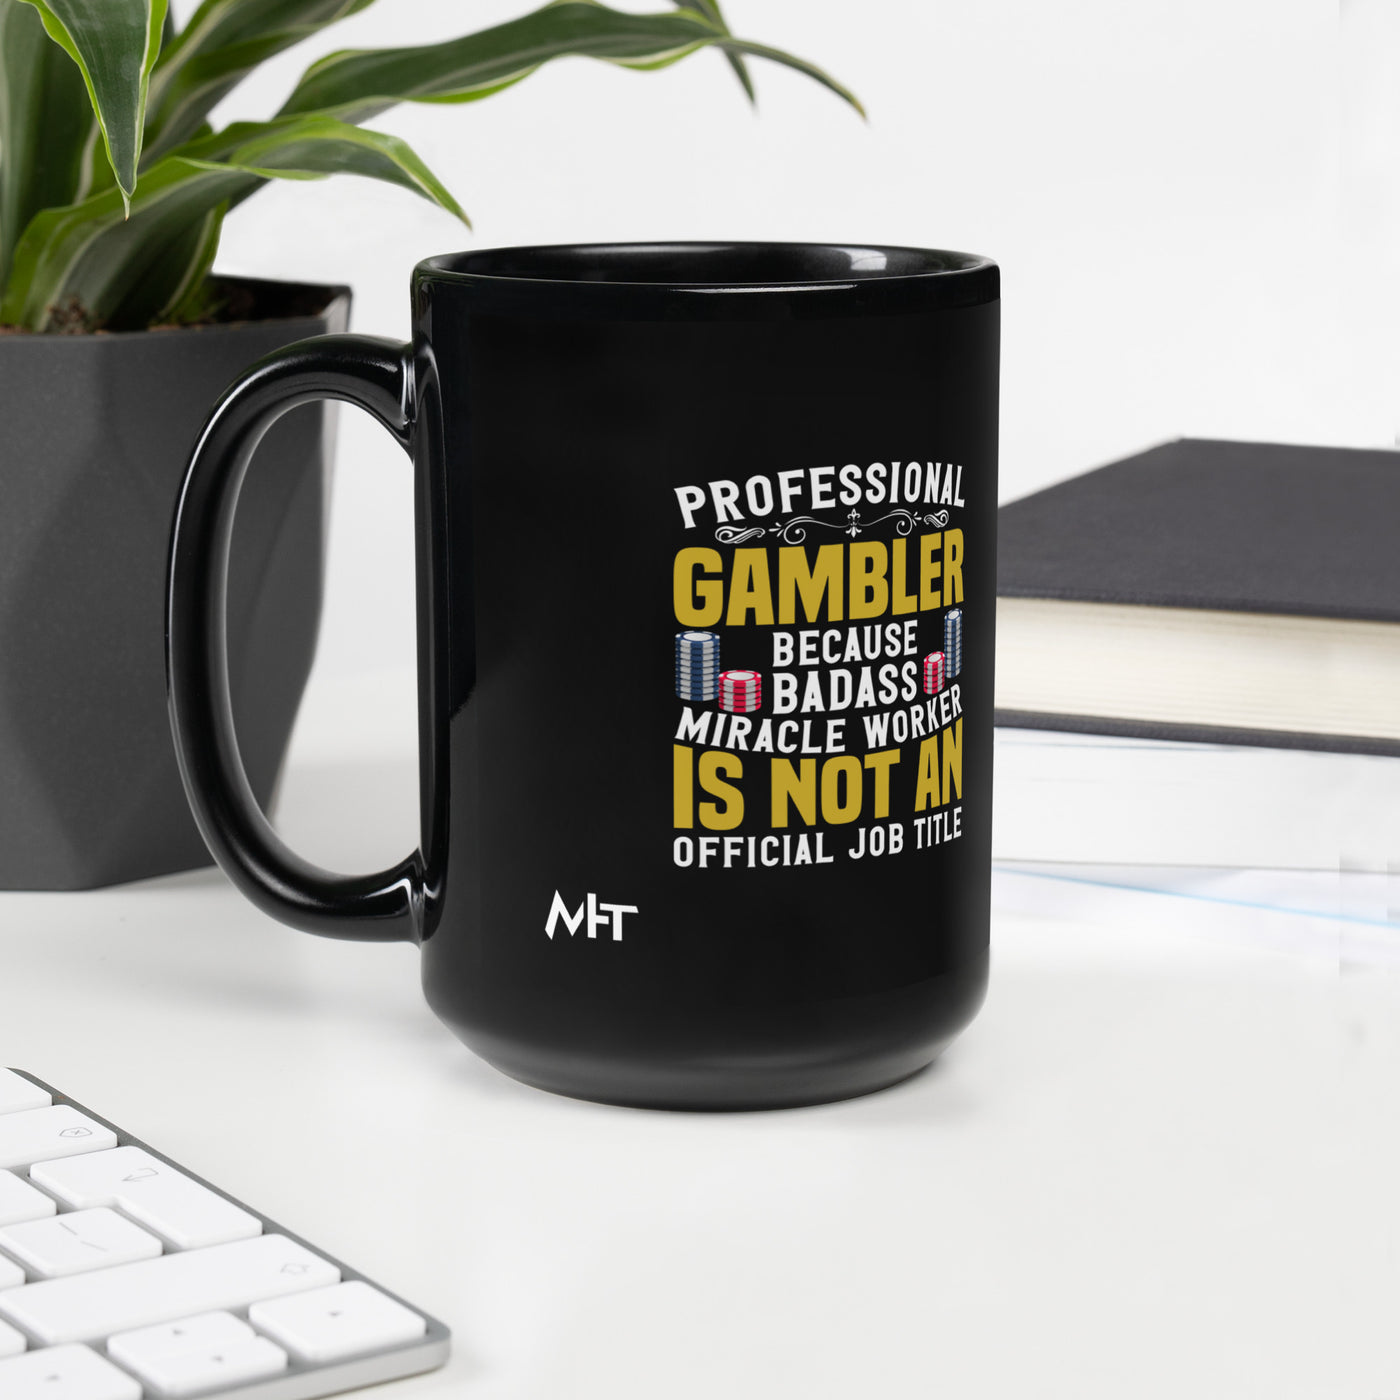 Professional Gambler because Badass Miracle Worker is an official Job Title - Black Glossy Mug